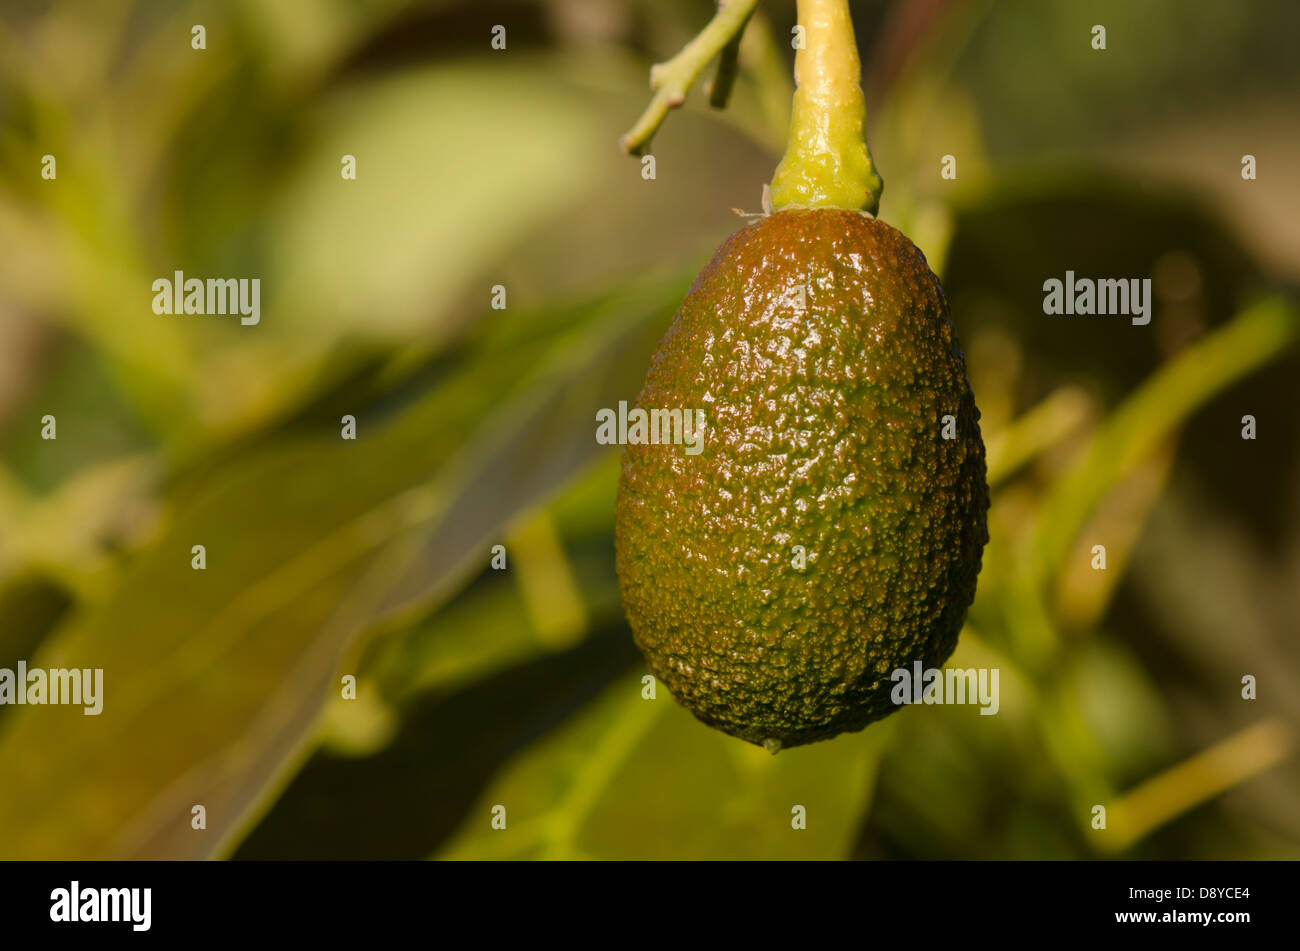 Young unripe Hass avocado, Persea americana 'Hass',  fruit growing on tree. Andalusia, Spain. Stock Photo